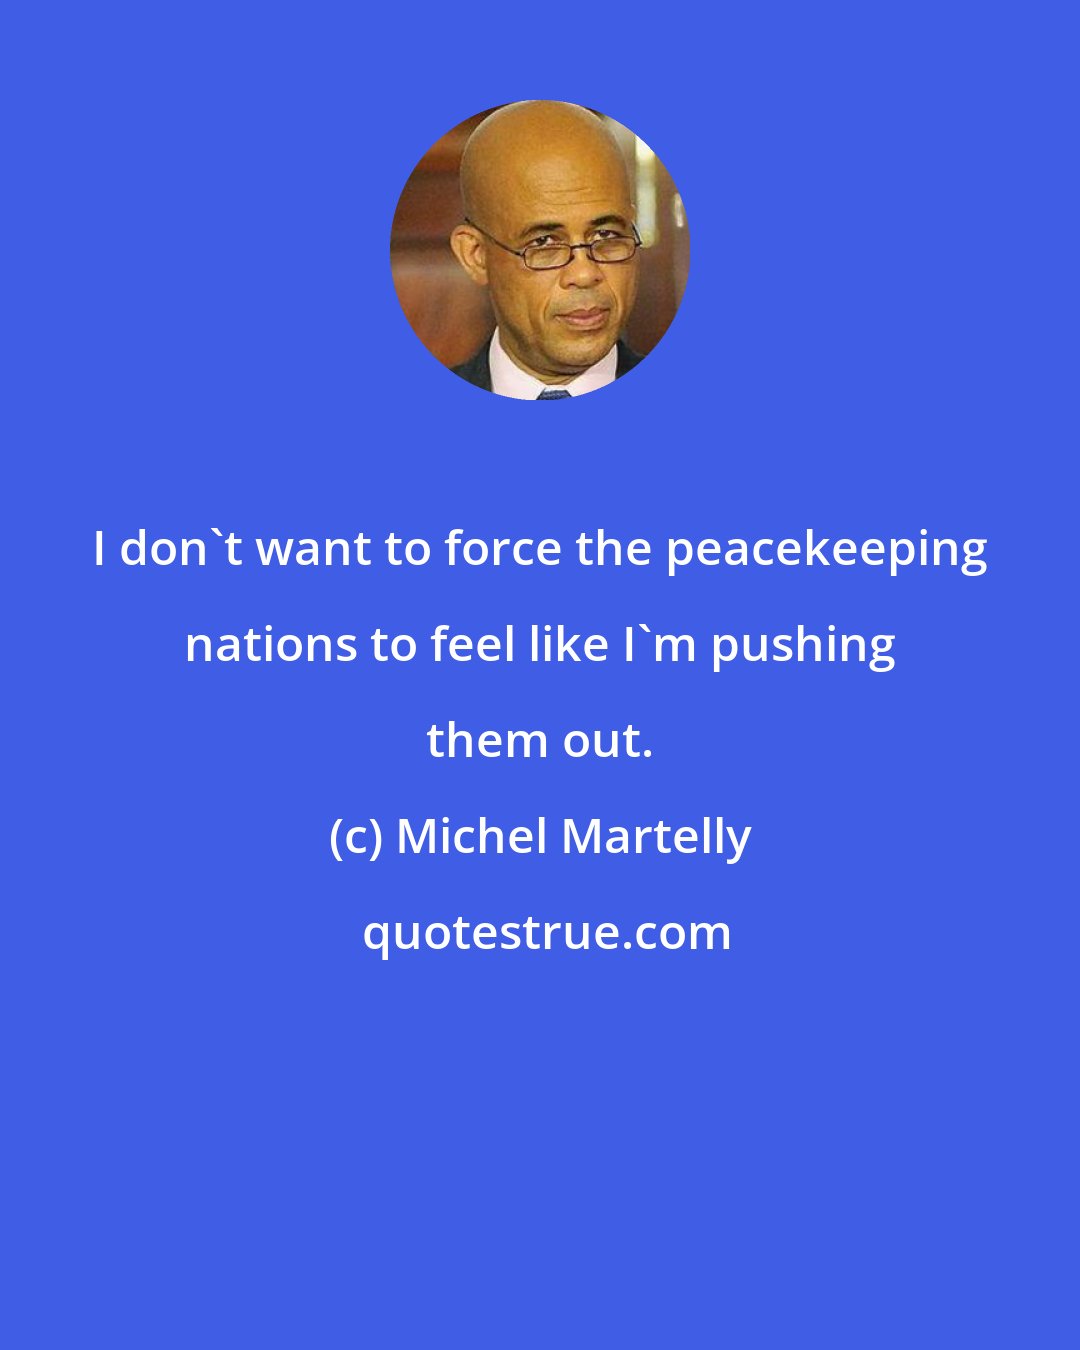 Michel Martelly: I don't want to force the peacekeeping nations to feel like I'm pushing them out.